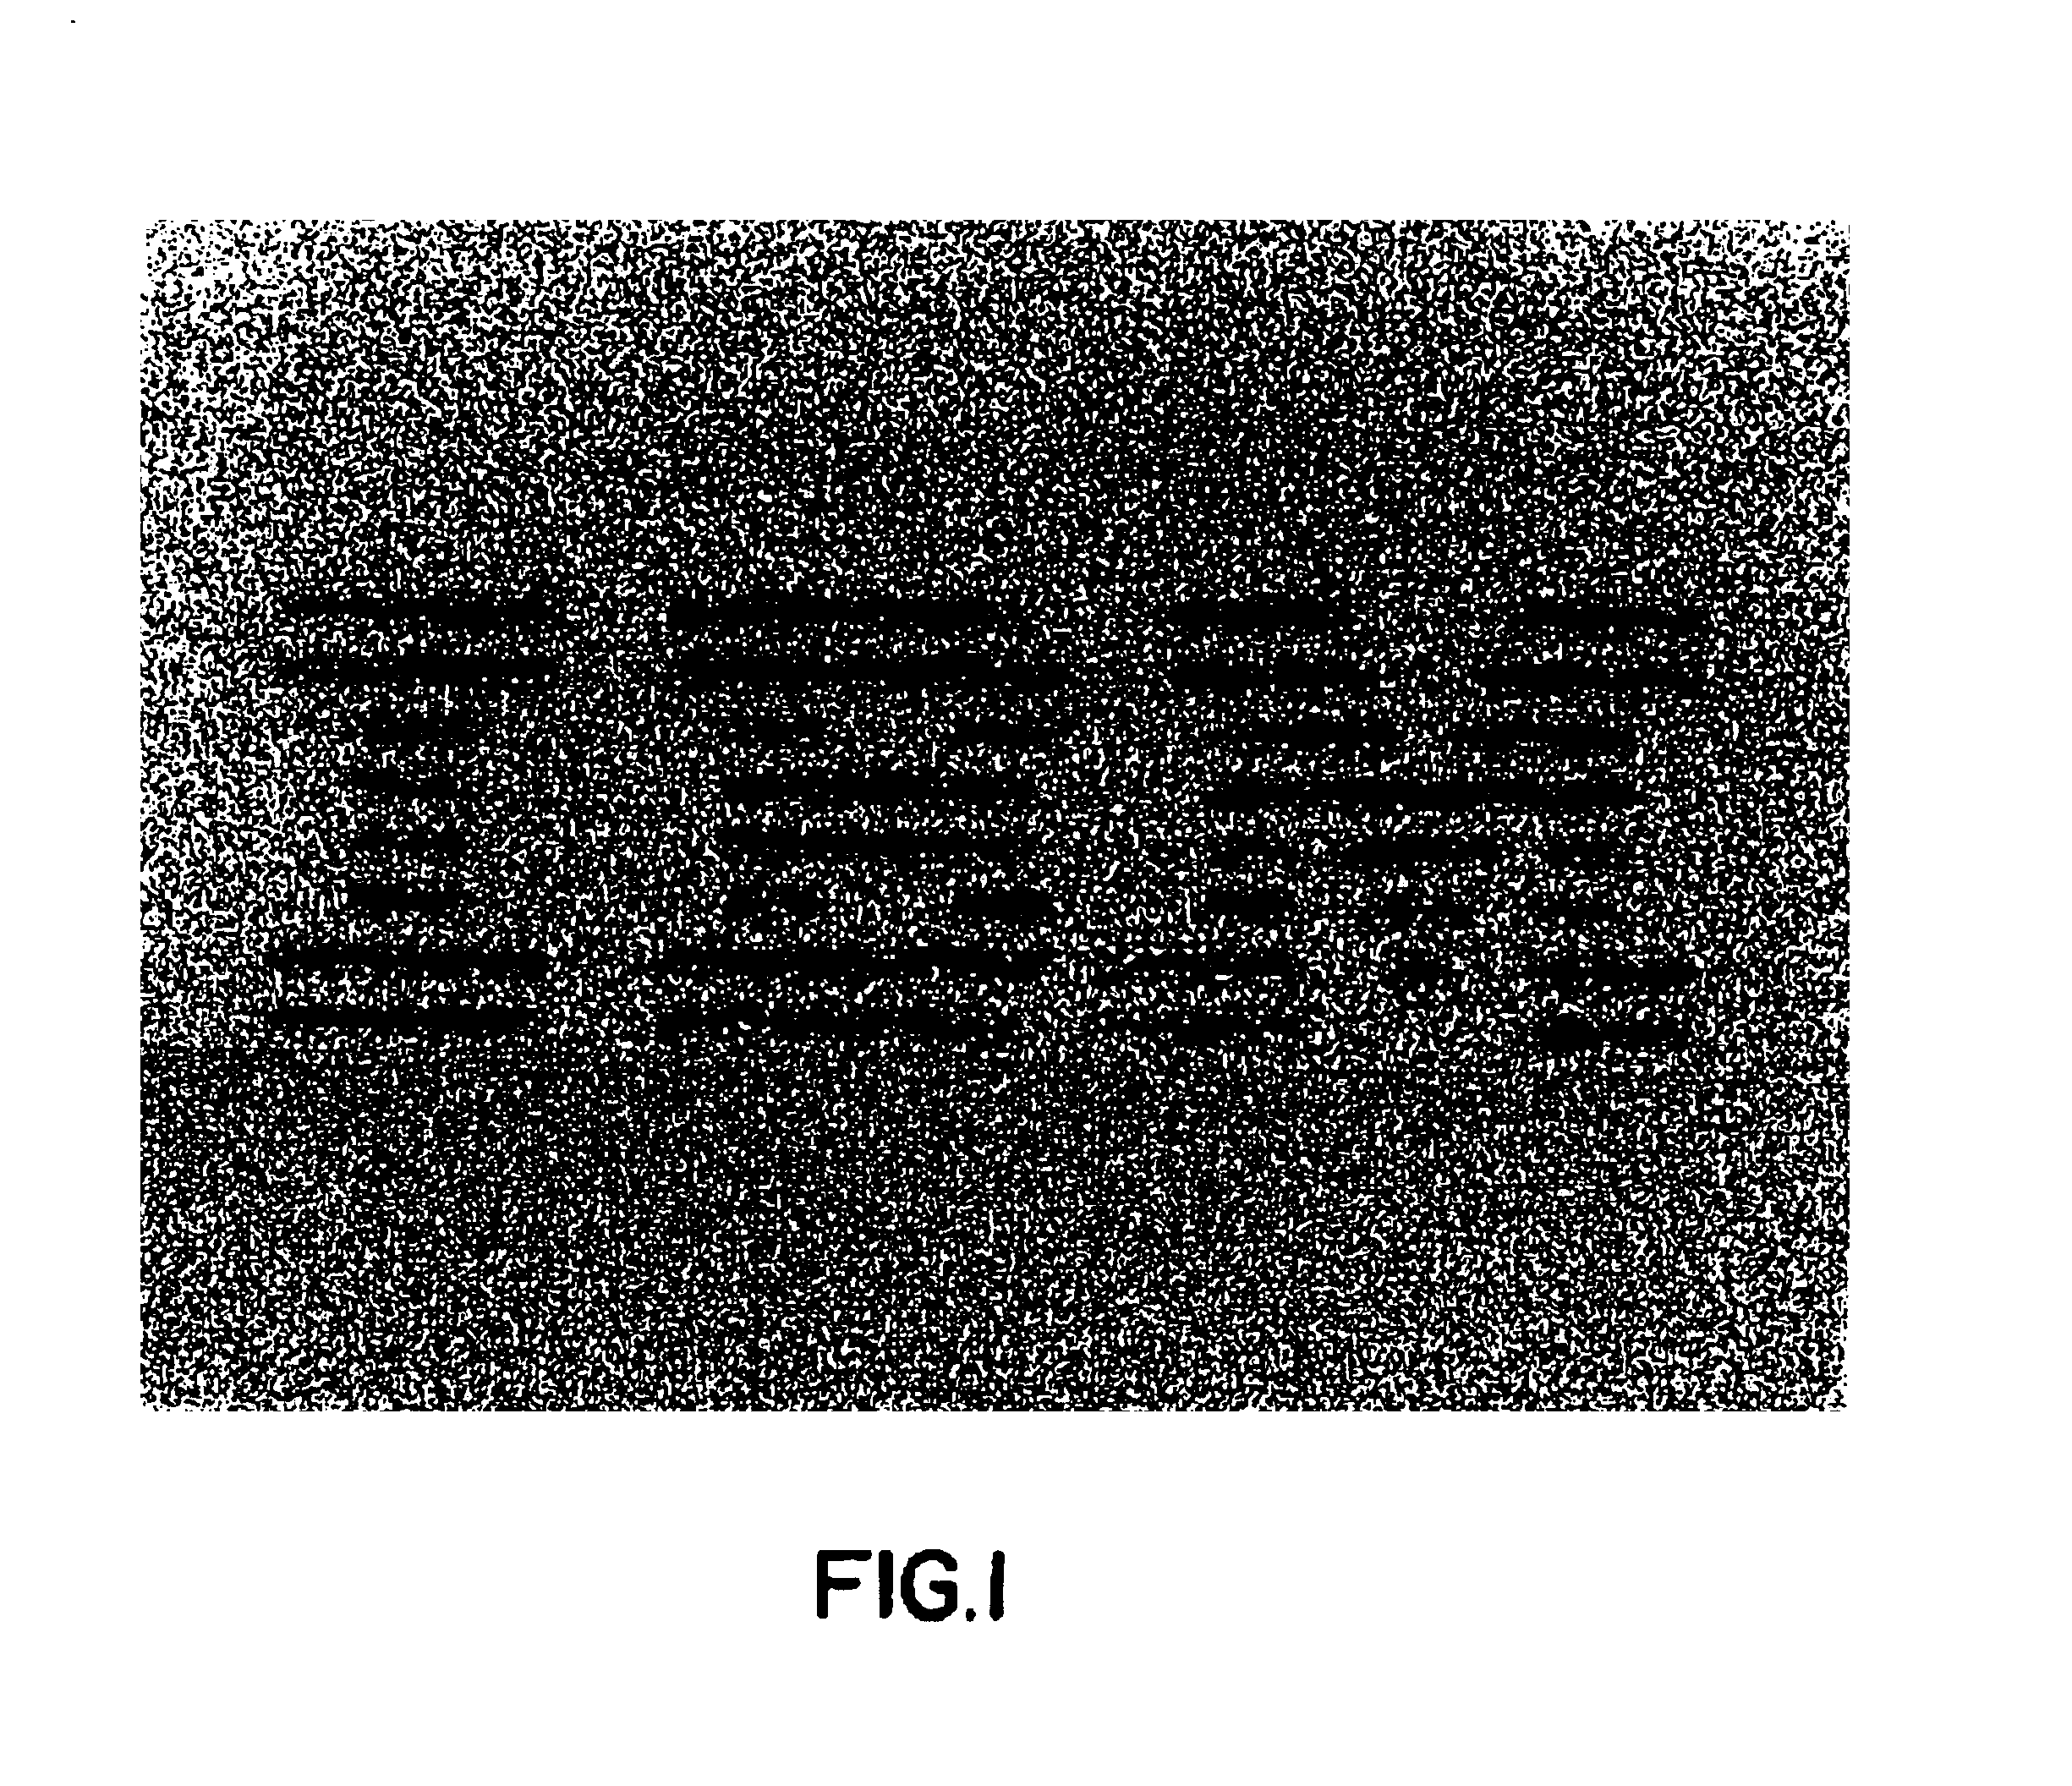 High sensitivity crosslinkable photoresist composition, based on soluble, film forming dendrimeric calix[4] arene compositions method and for use thereof